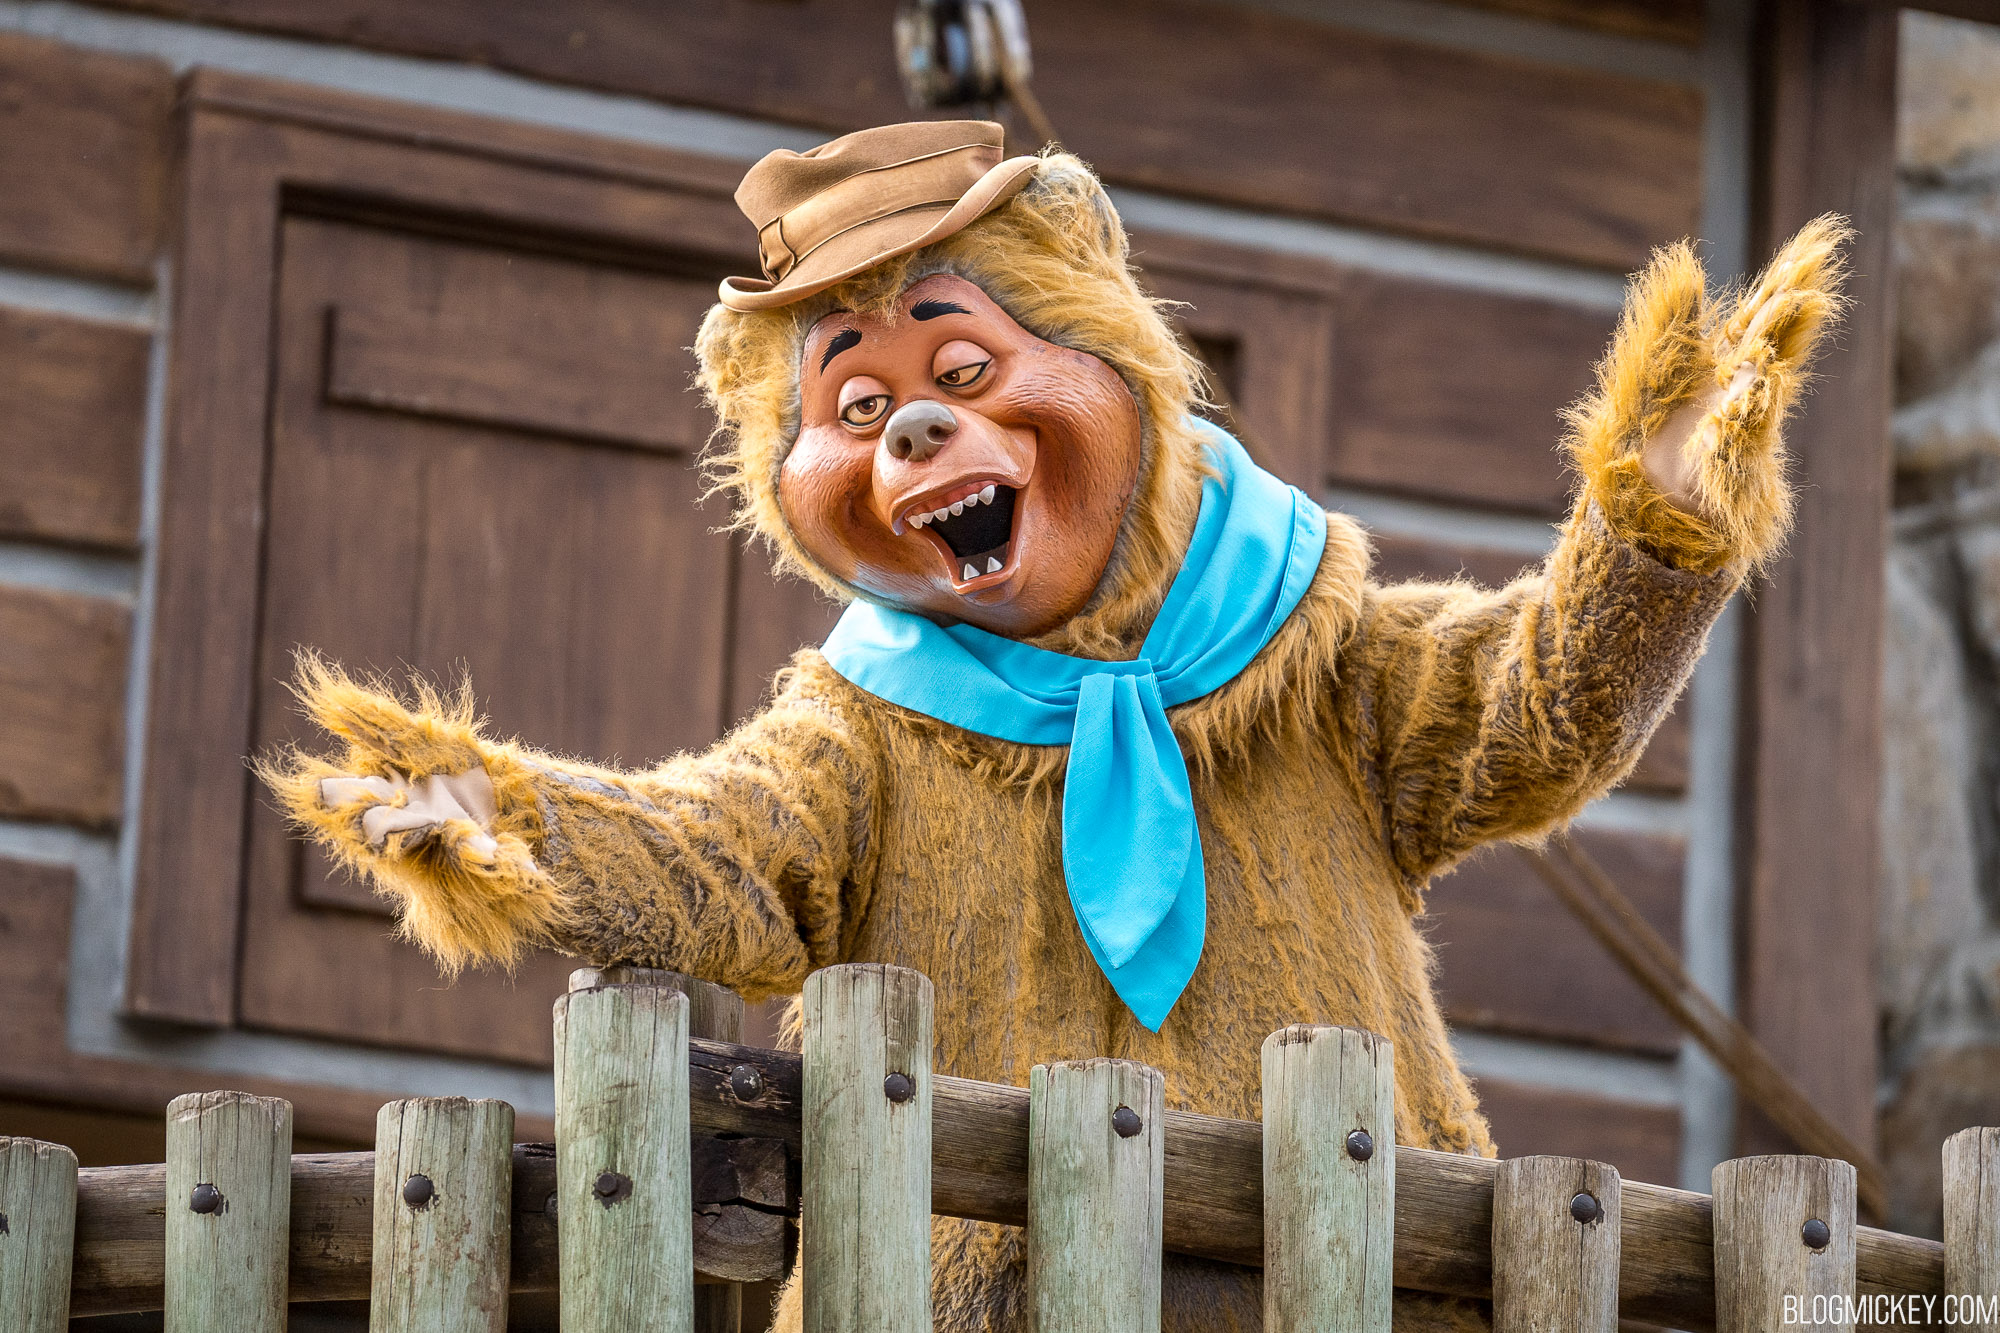 Country Bears Descend From On High to Greet Guests at Magic Kingdom